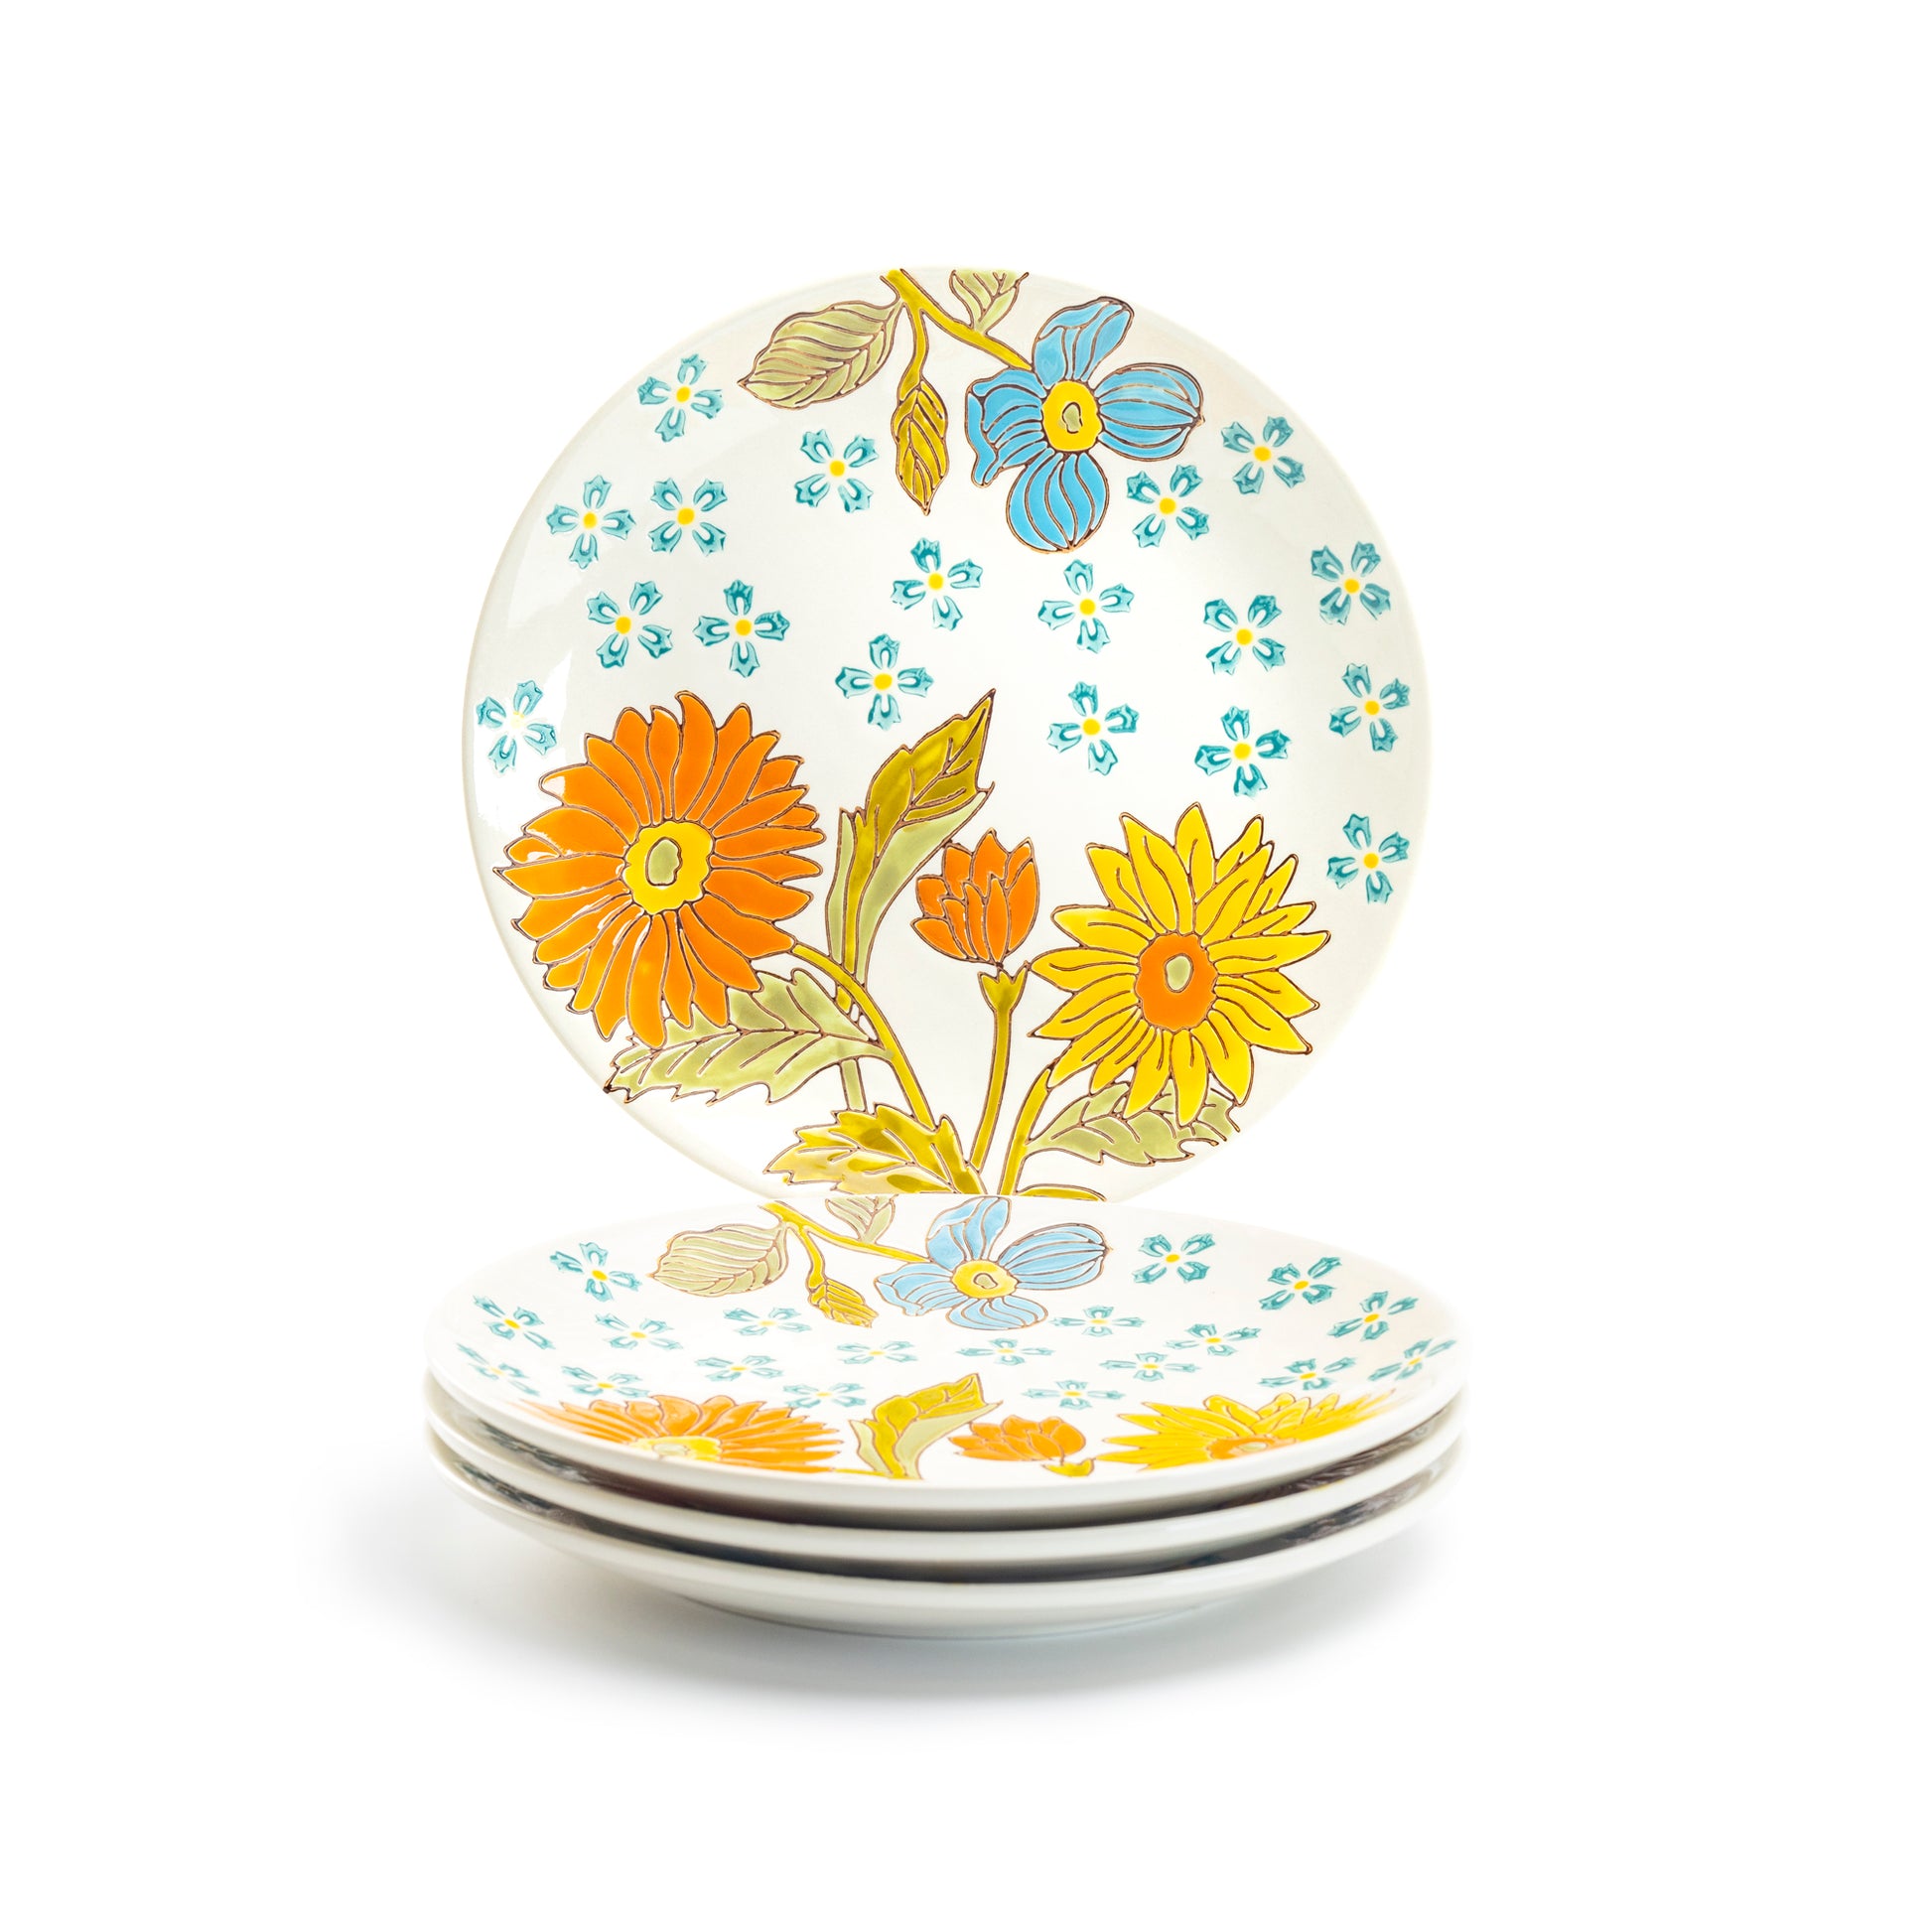 Dutch Wax 8" Daisy Hand Crafted and Painted Dessert / Salad Plate set of 4